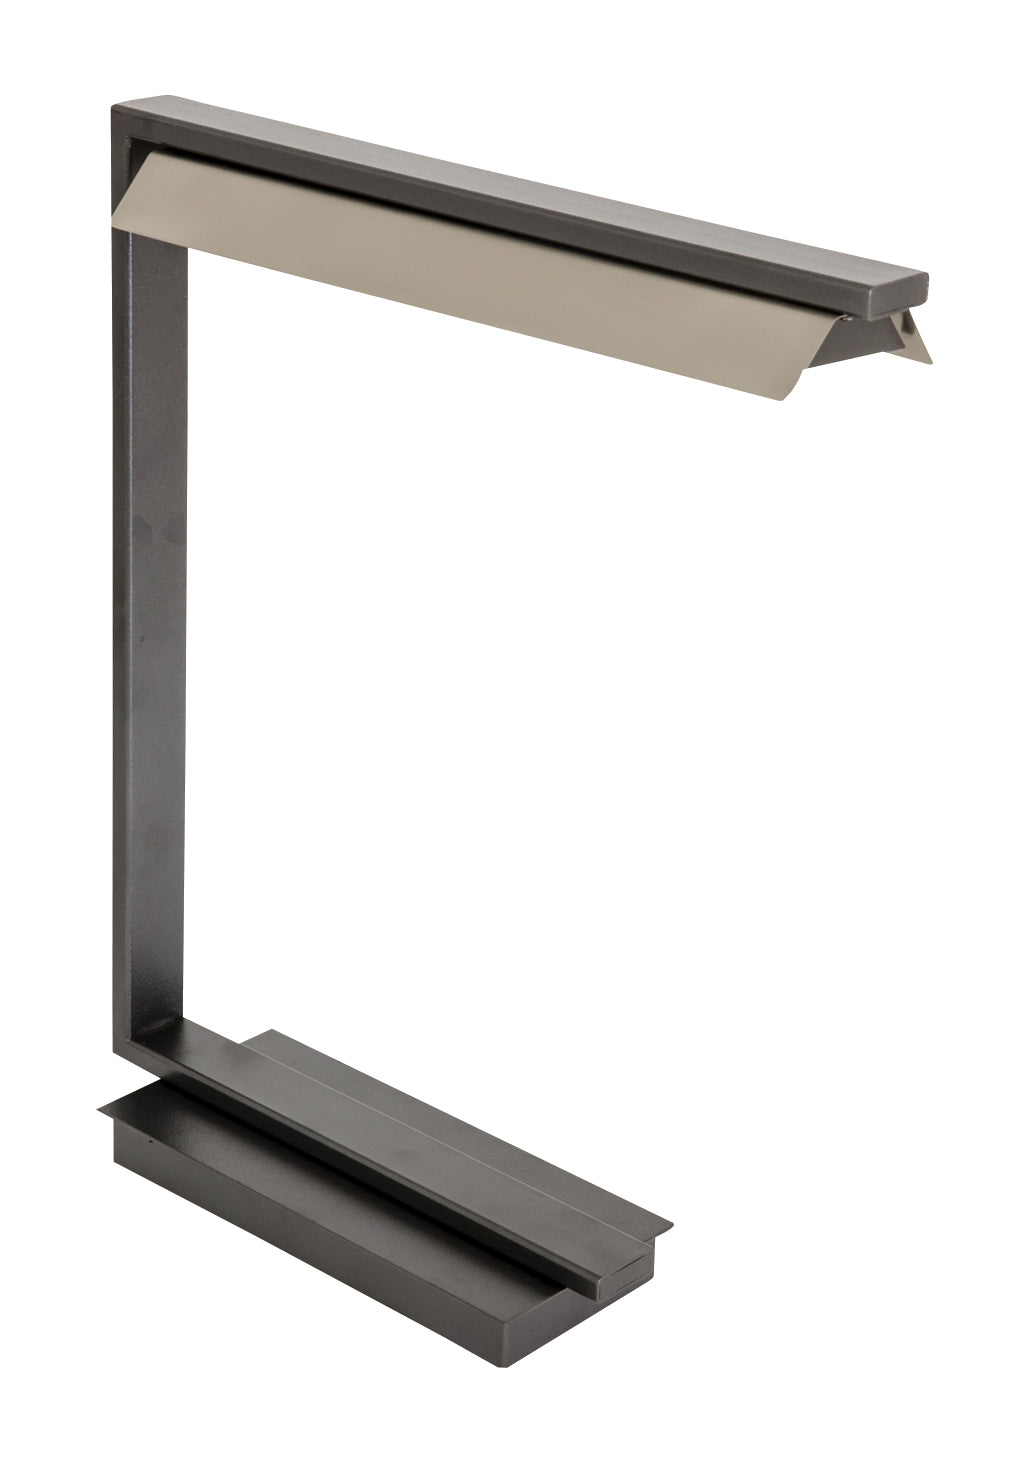 House of Troy 19" Jay LED Table Lamp in Granite with Satin Nickel JLED550-GT